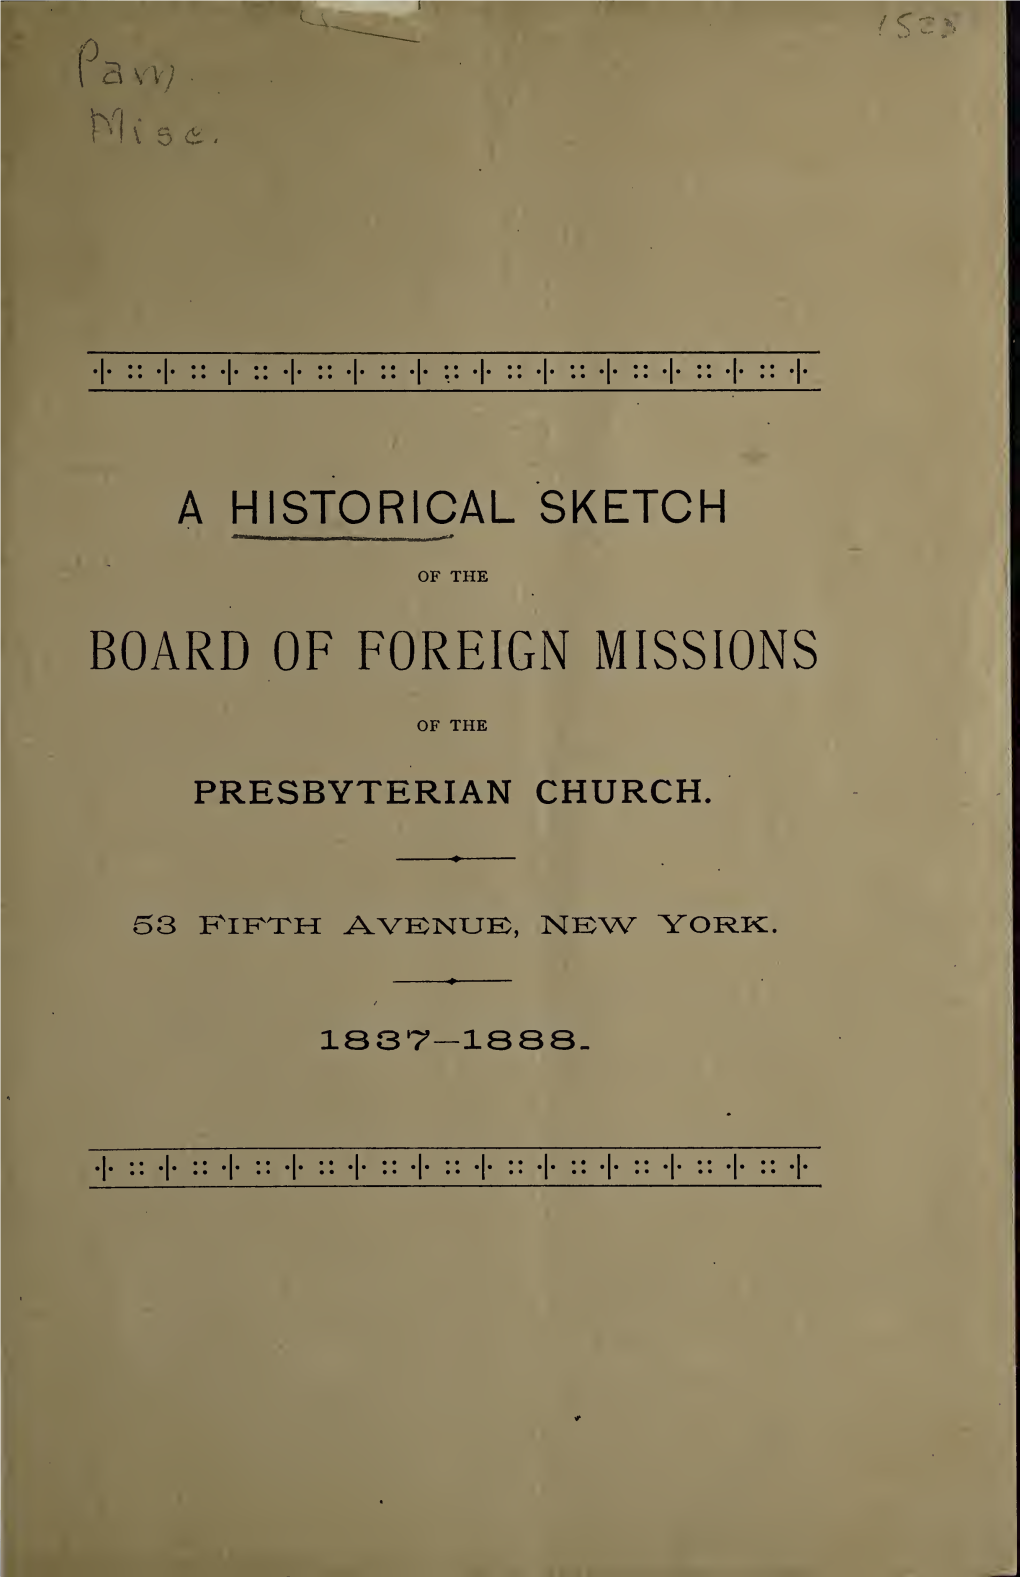 A Historical Sketch of the Board of Foreign Missions of The